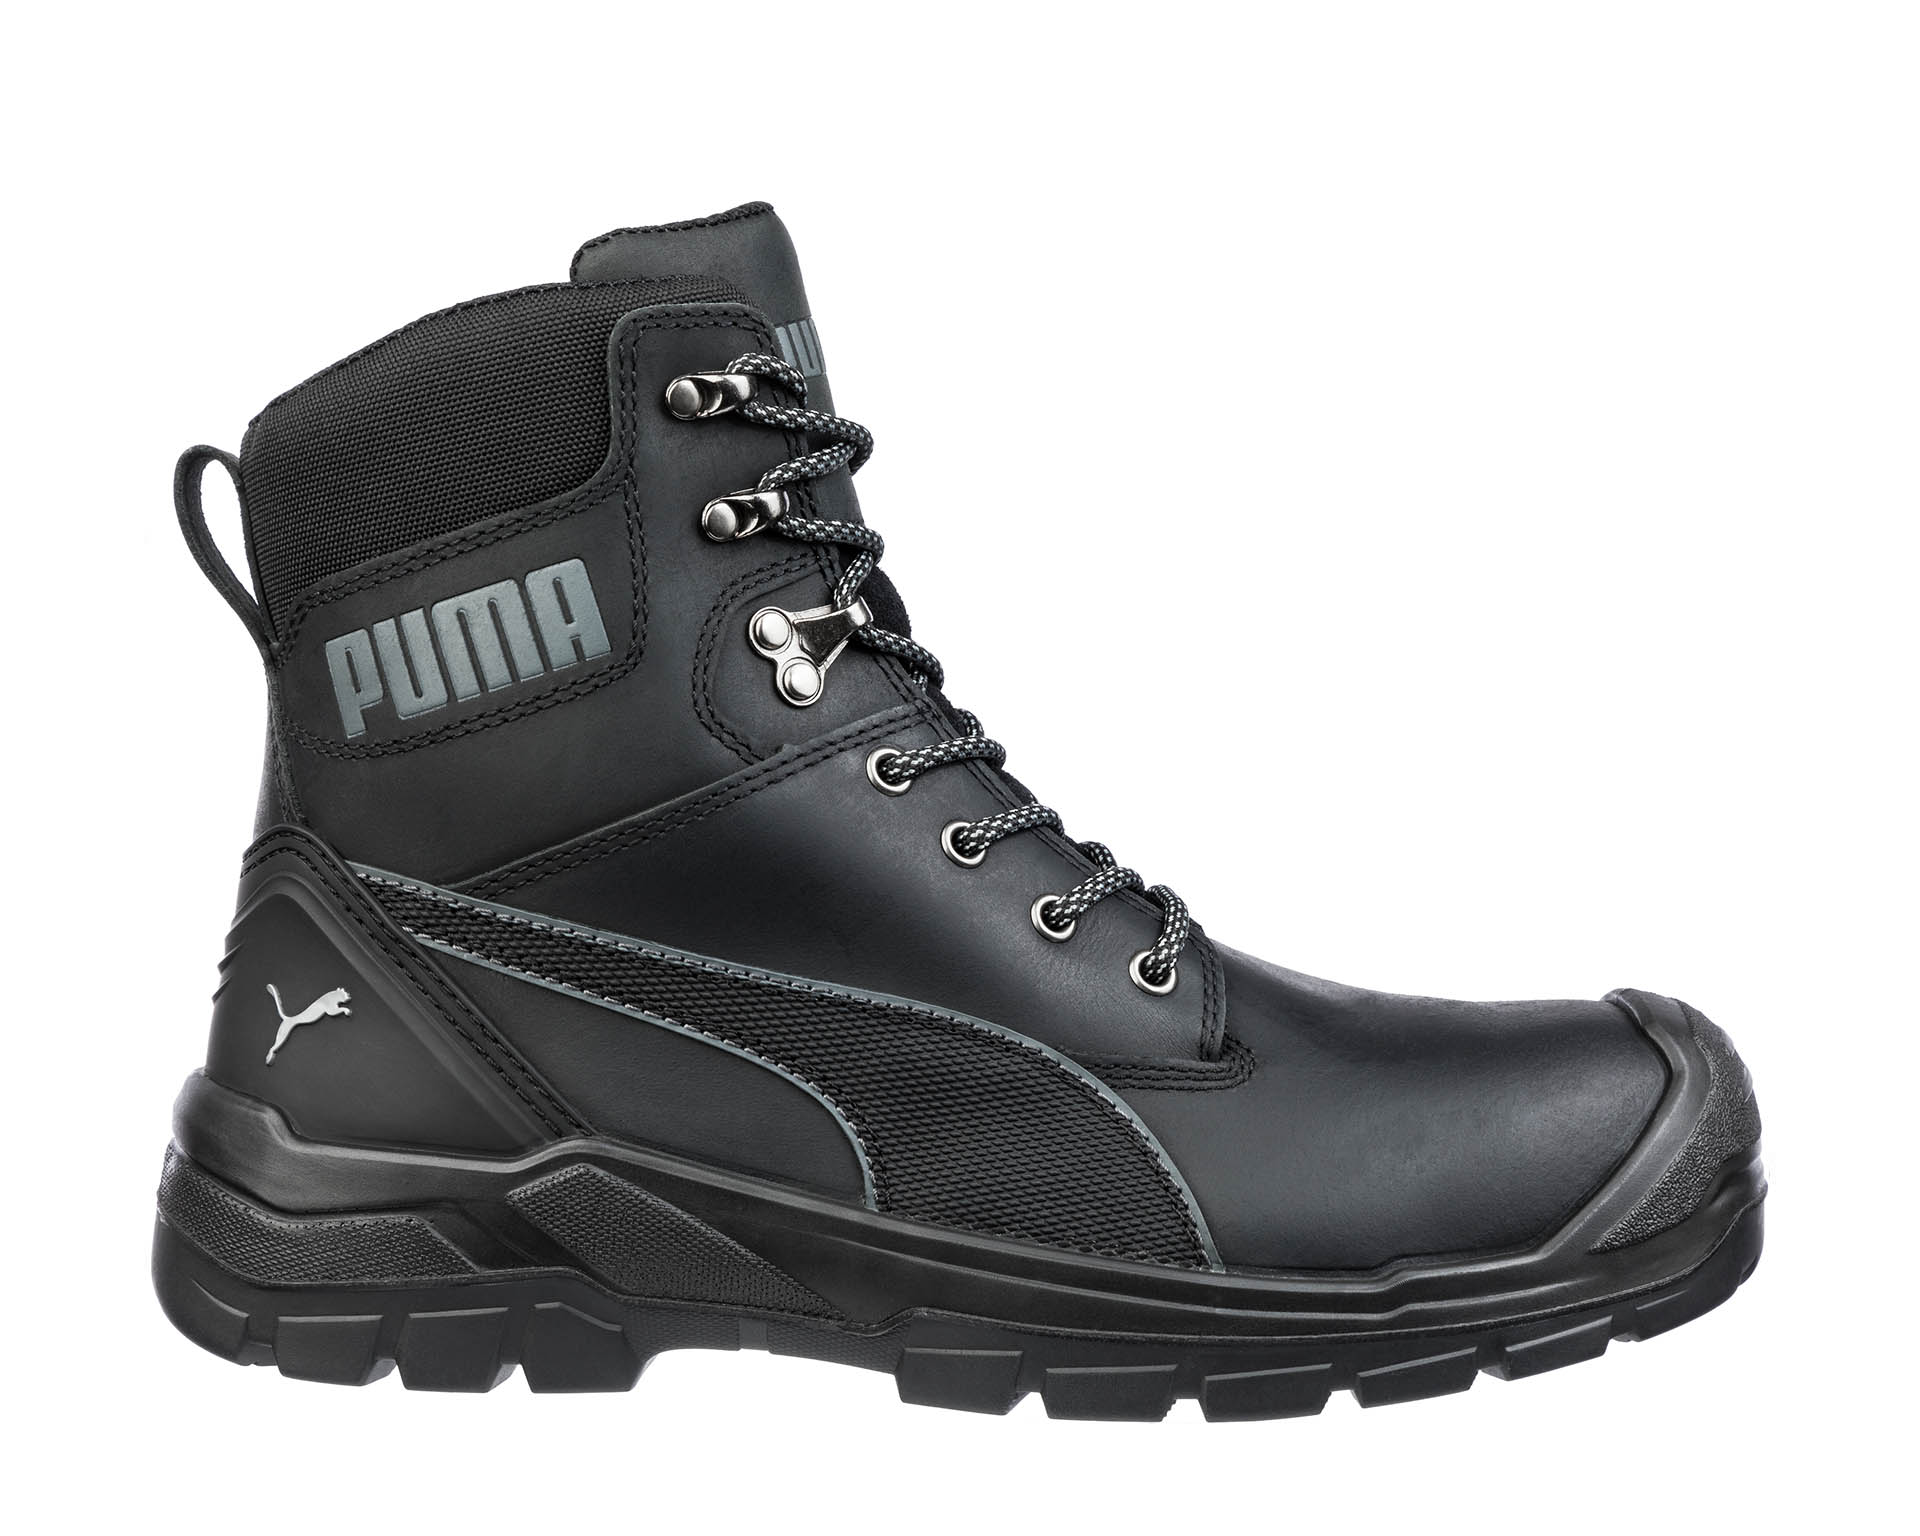 Puma Safety Conquest Black CTX High Safety Boot